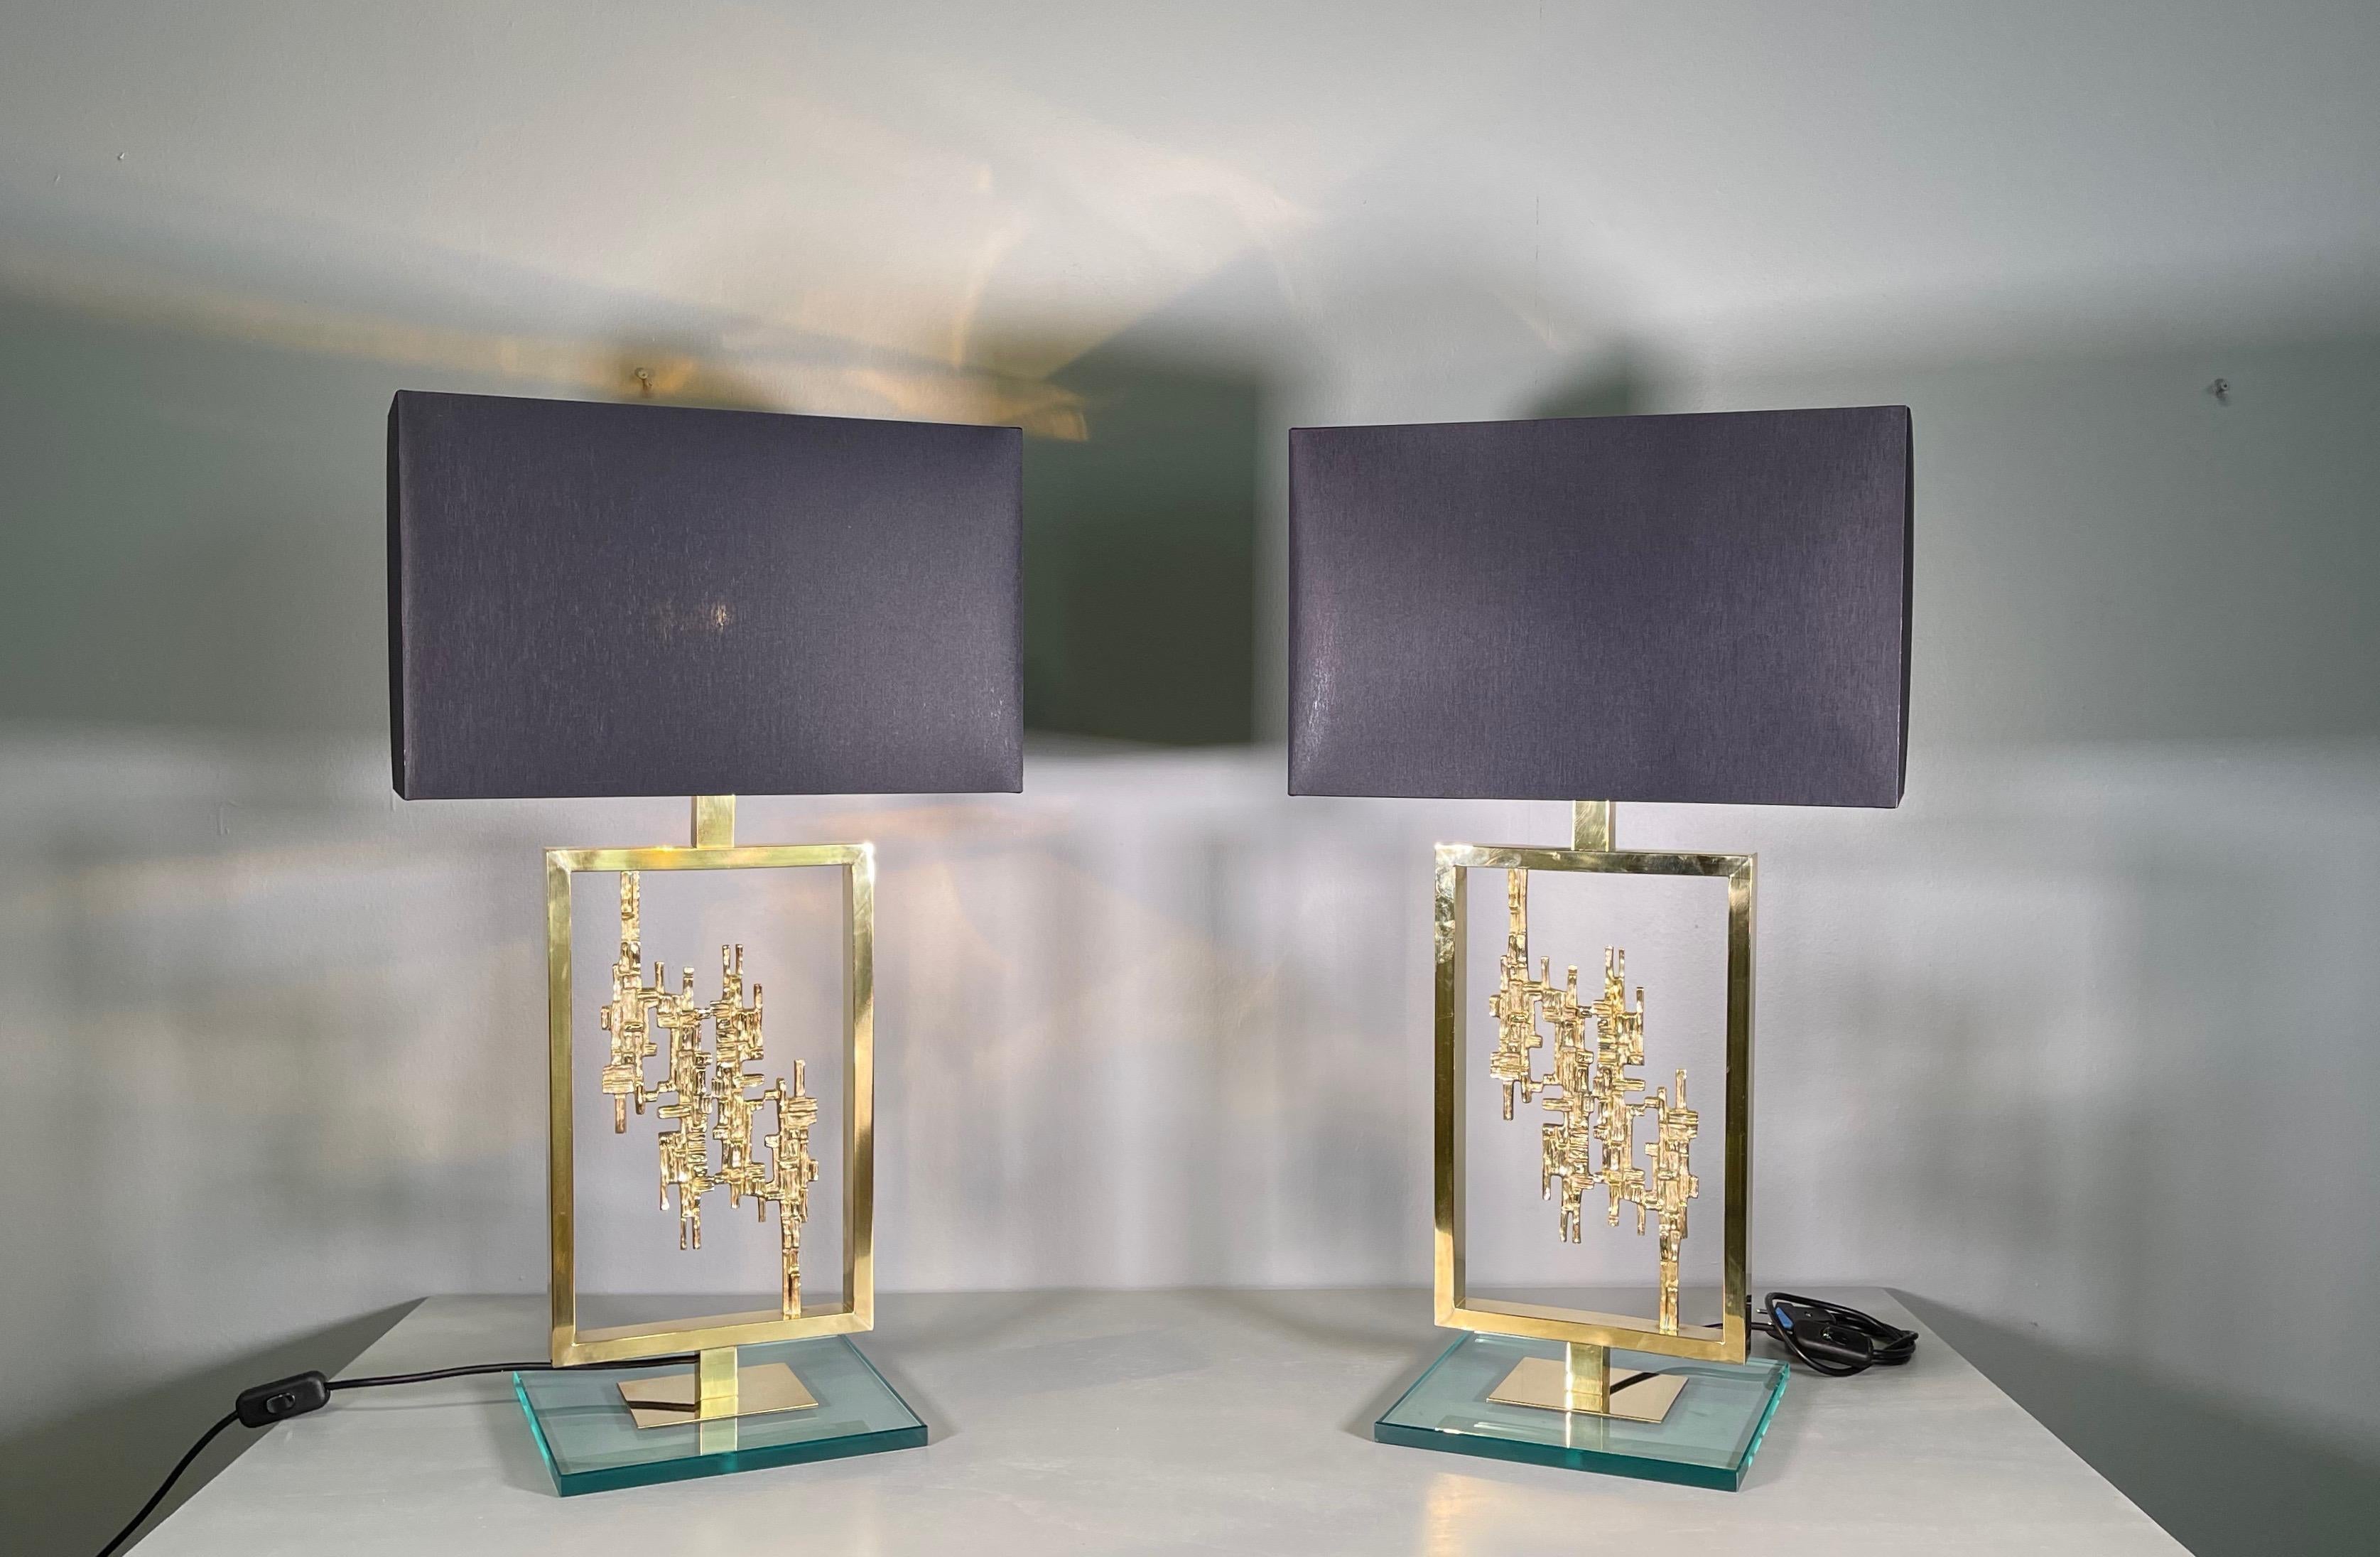 Pair of bronze table lamps by Luciano Frigerio, Italy, 1980s.